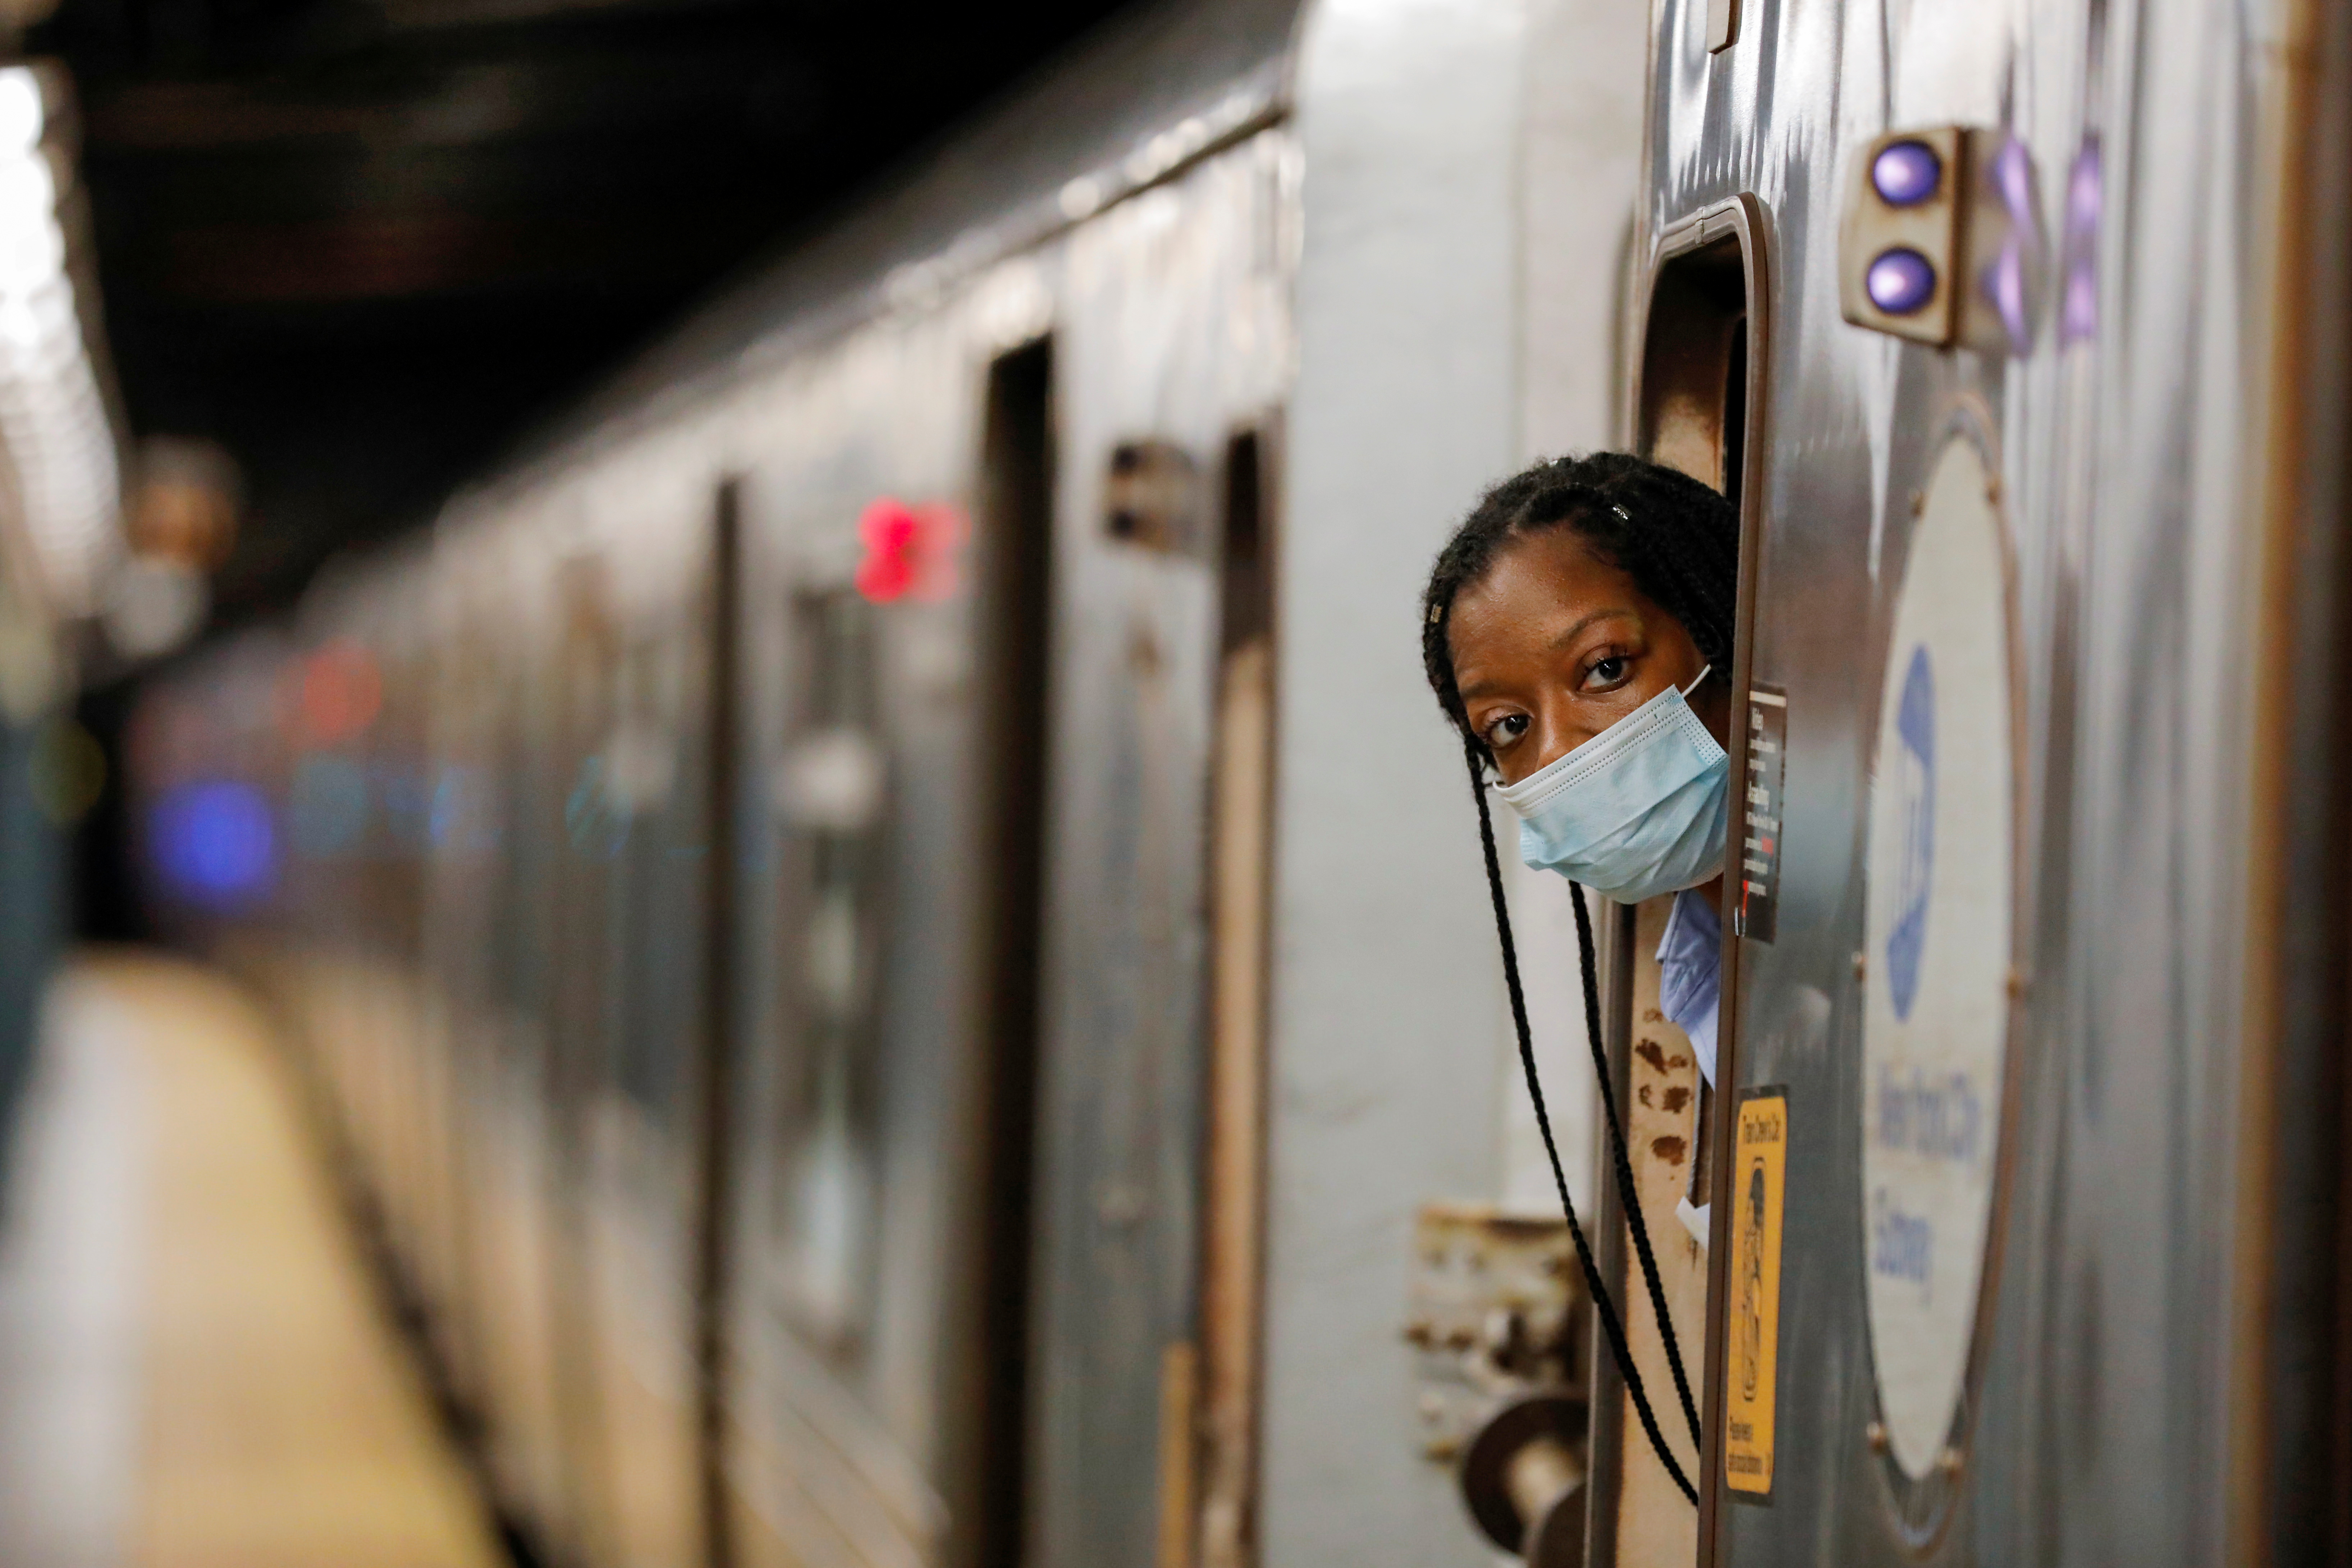 Cellular service is coming to New York's subway tunnels, but it's going to take ..